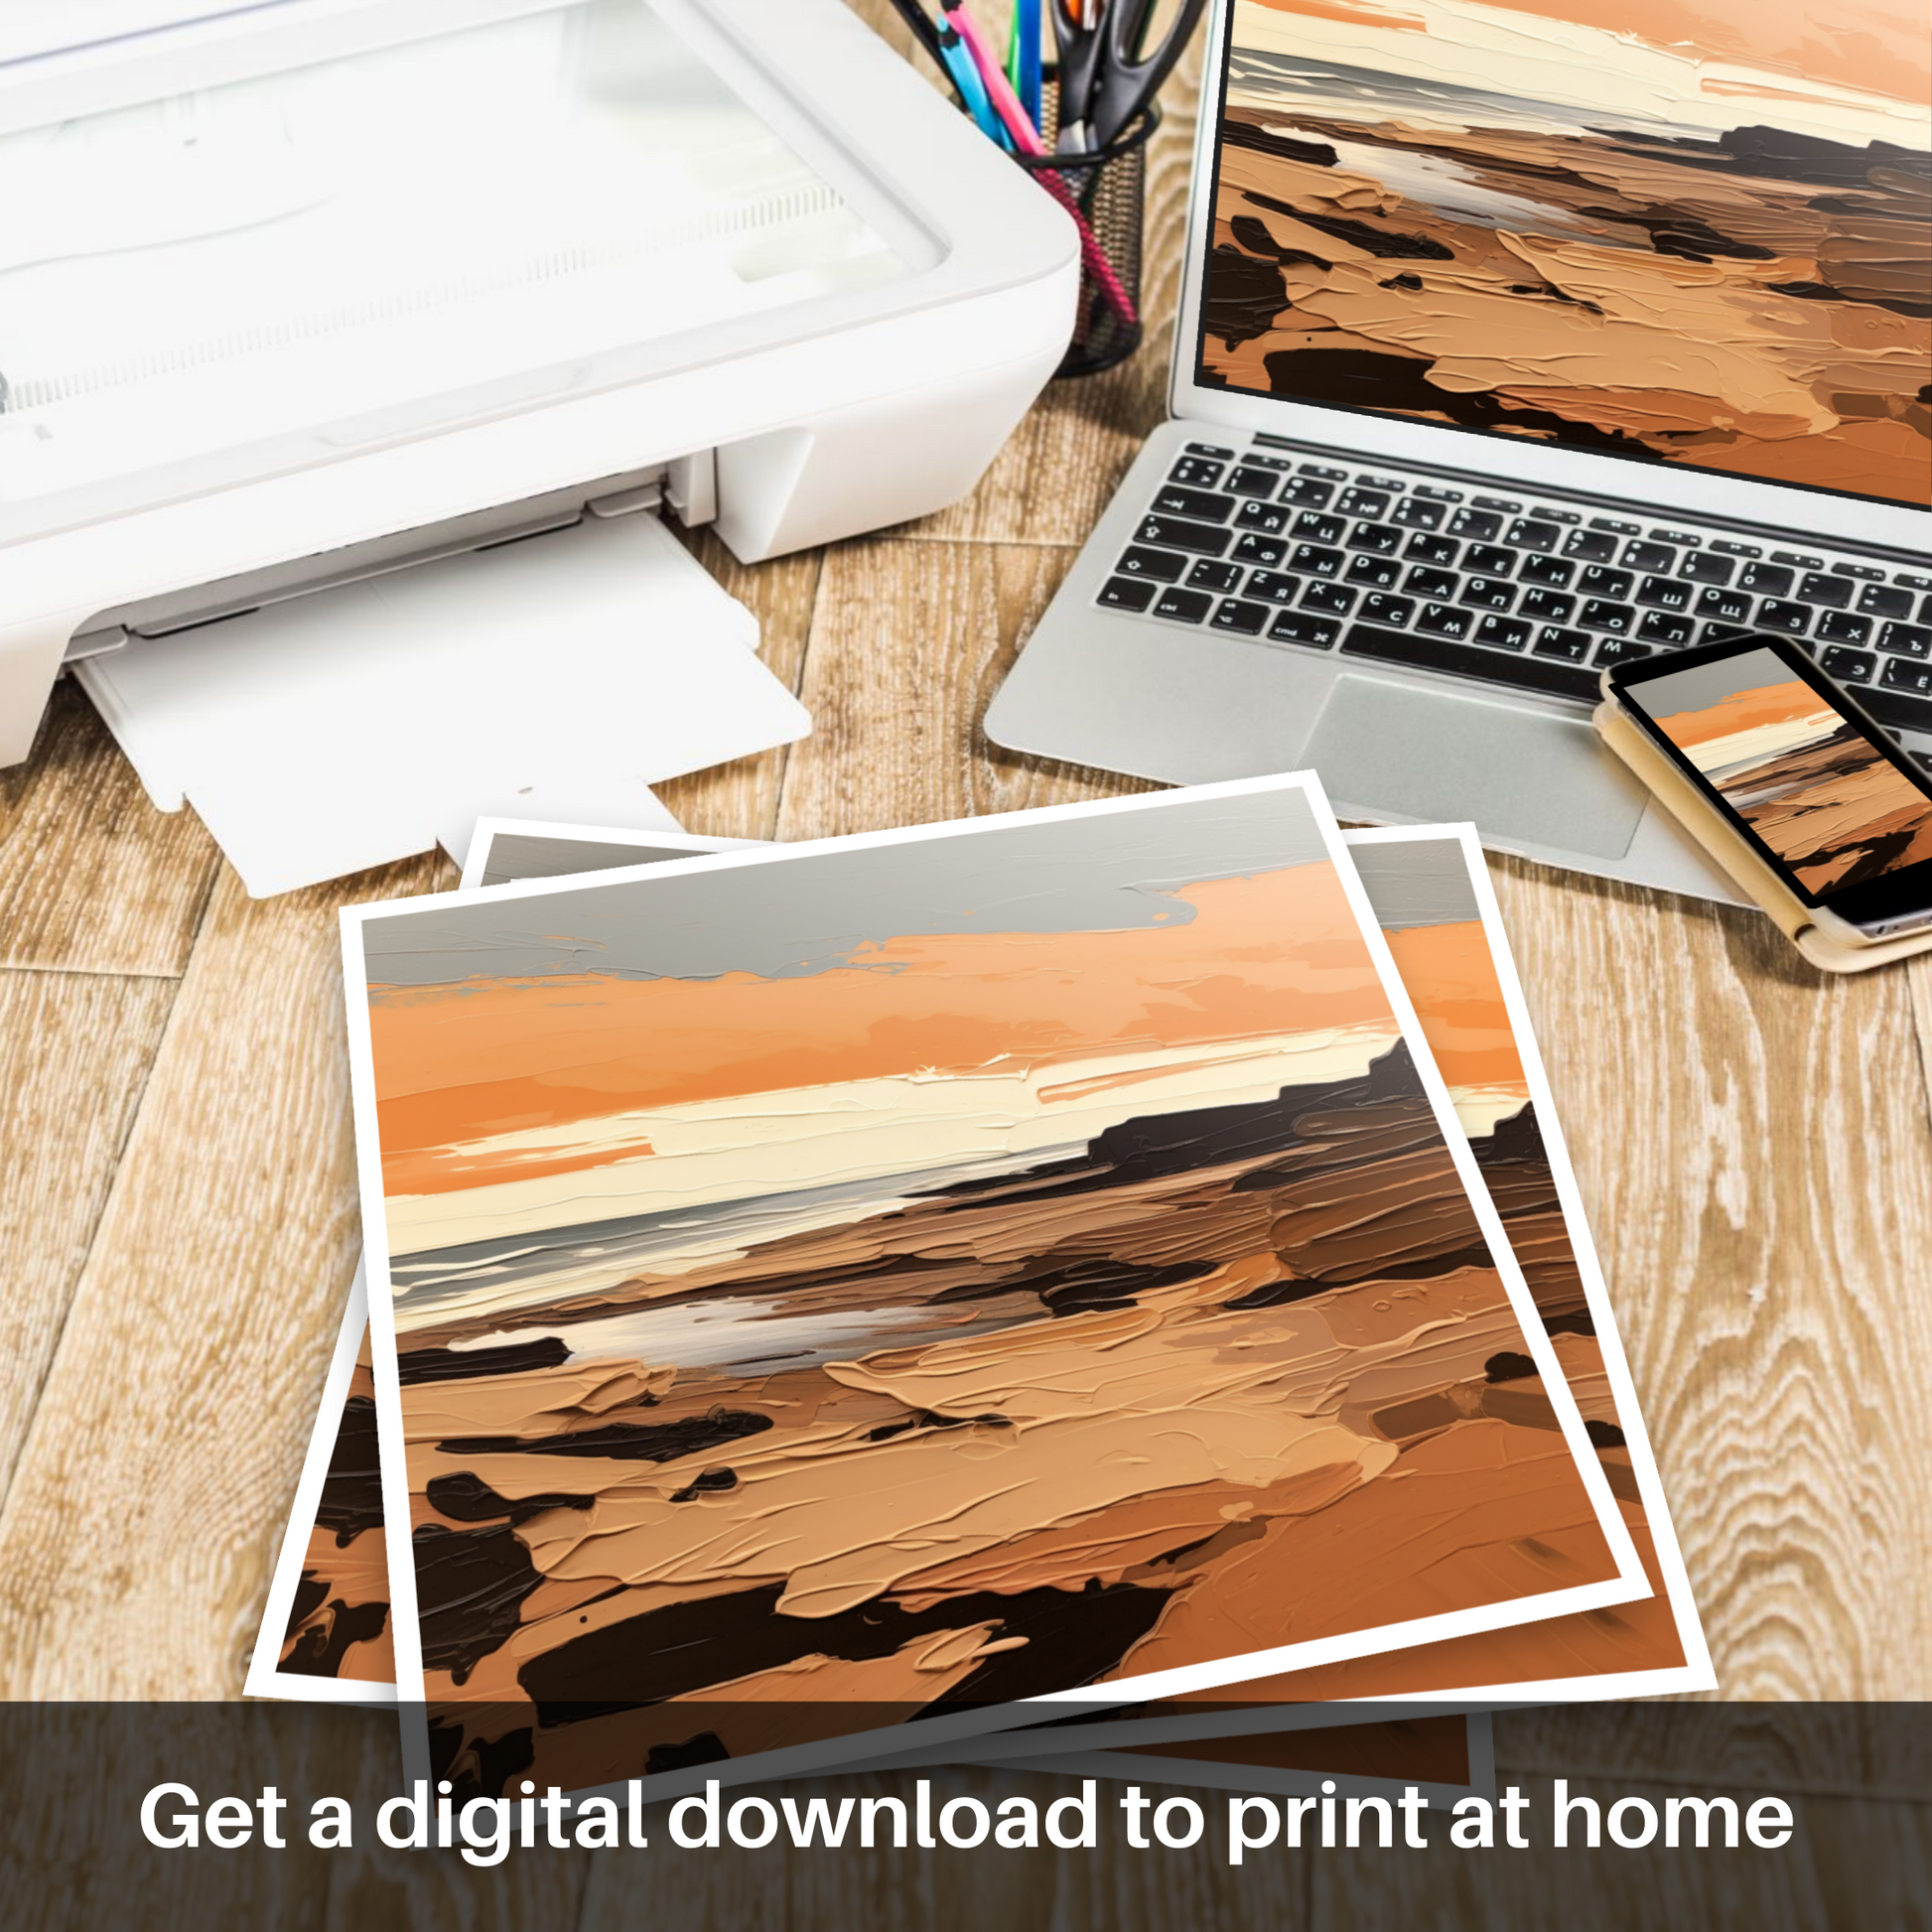 Downloadable and printable picture of Balmedie Beach at golden hour